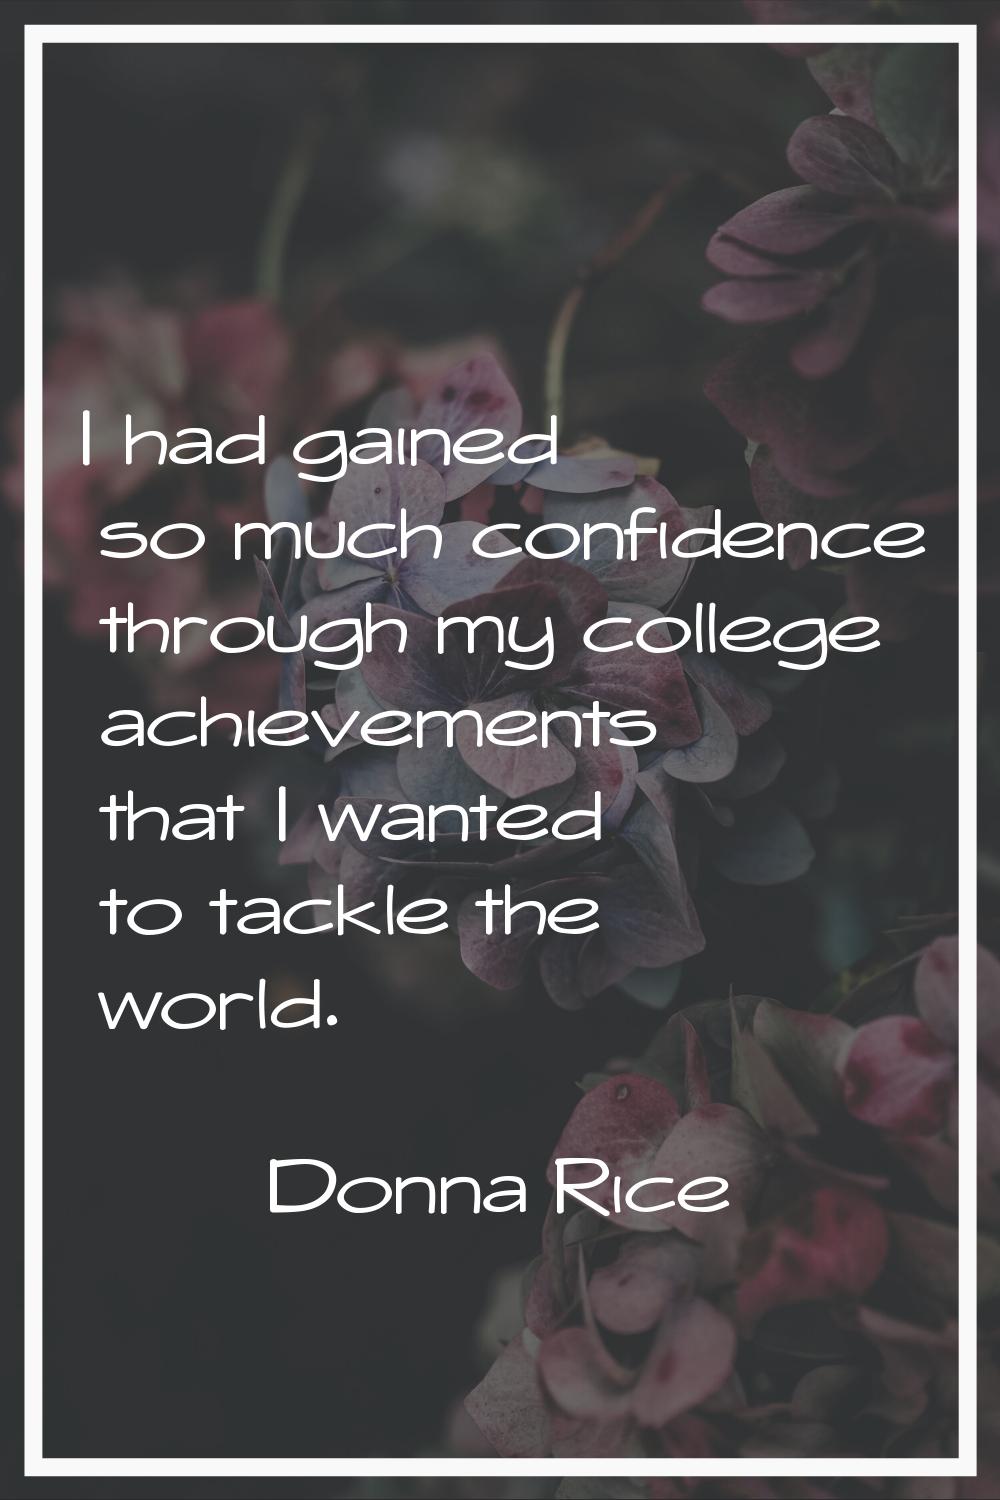 I had gained so much confidence through my college achievements that I wanted to tackle the world.